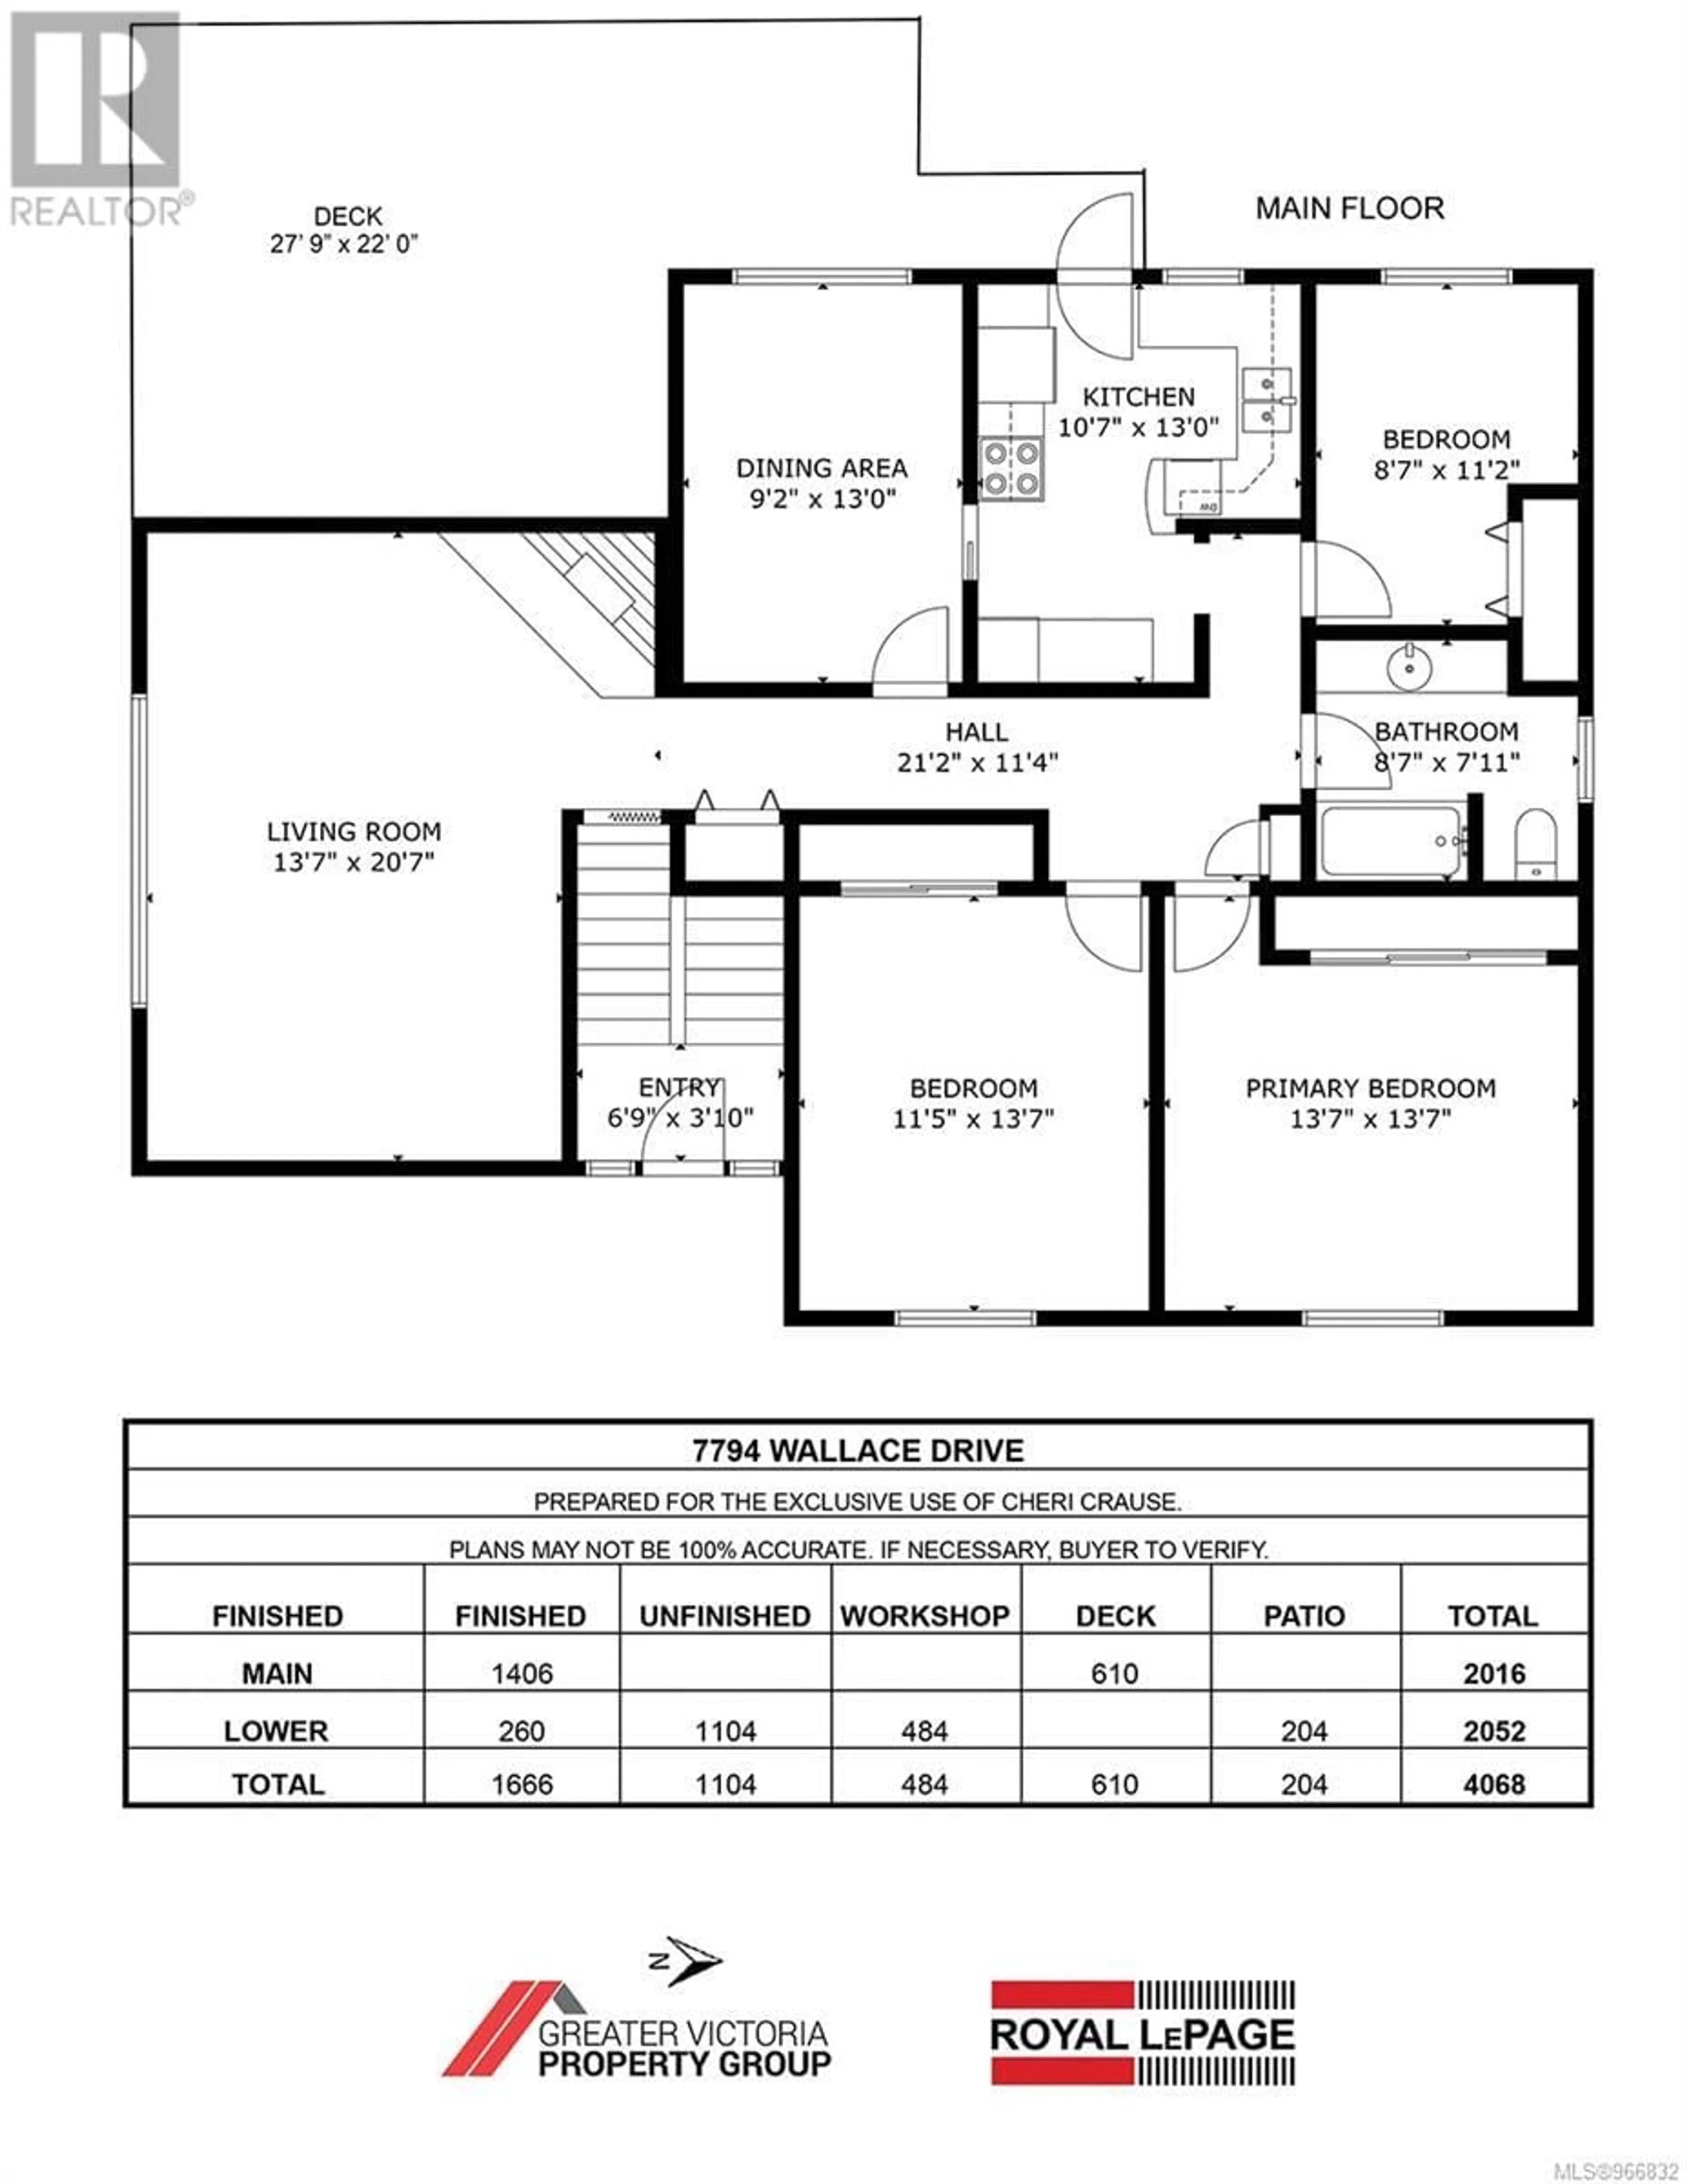 Floor plan for 7794 Wallace Dr, Central Saanich British Columbia V8M1T2